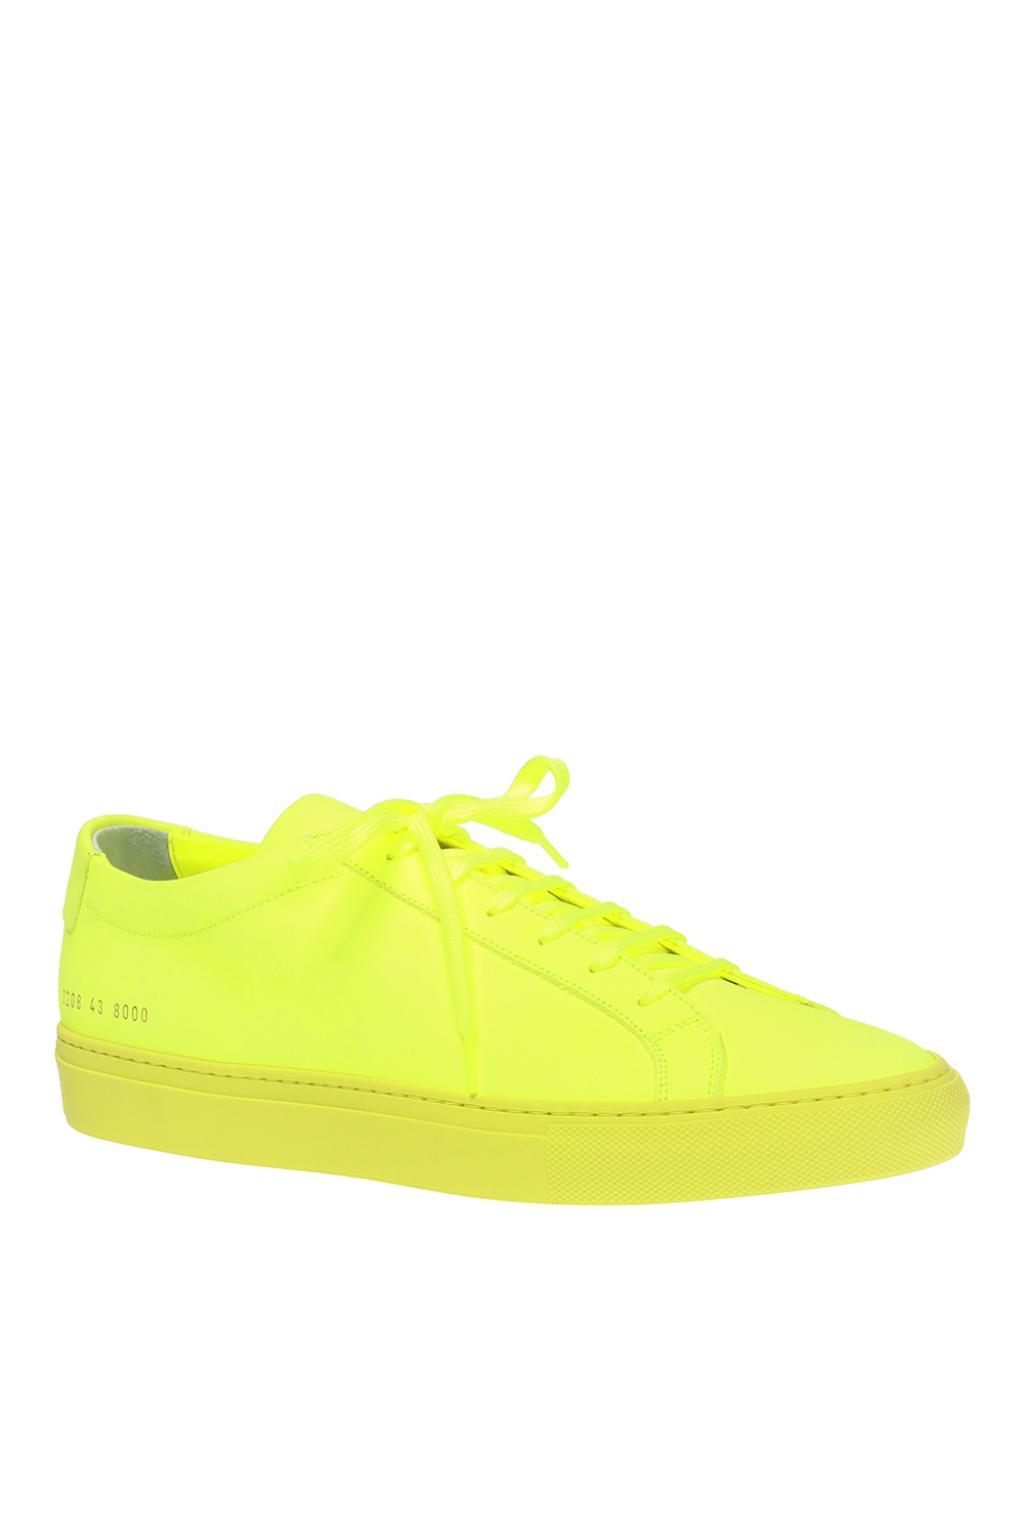 Common Projects Leather Classic Tennis Shoes in Yellow for Men | Lyst